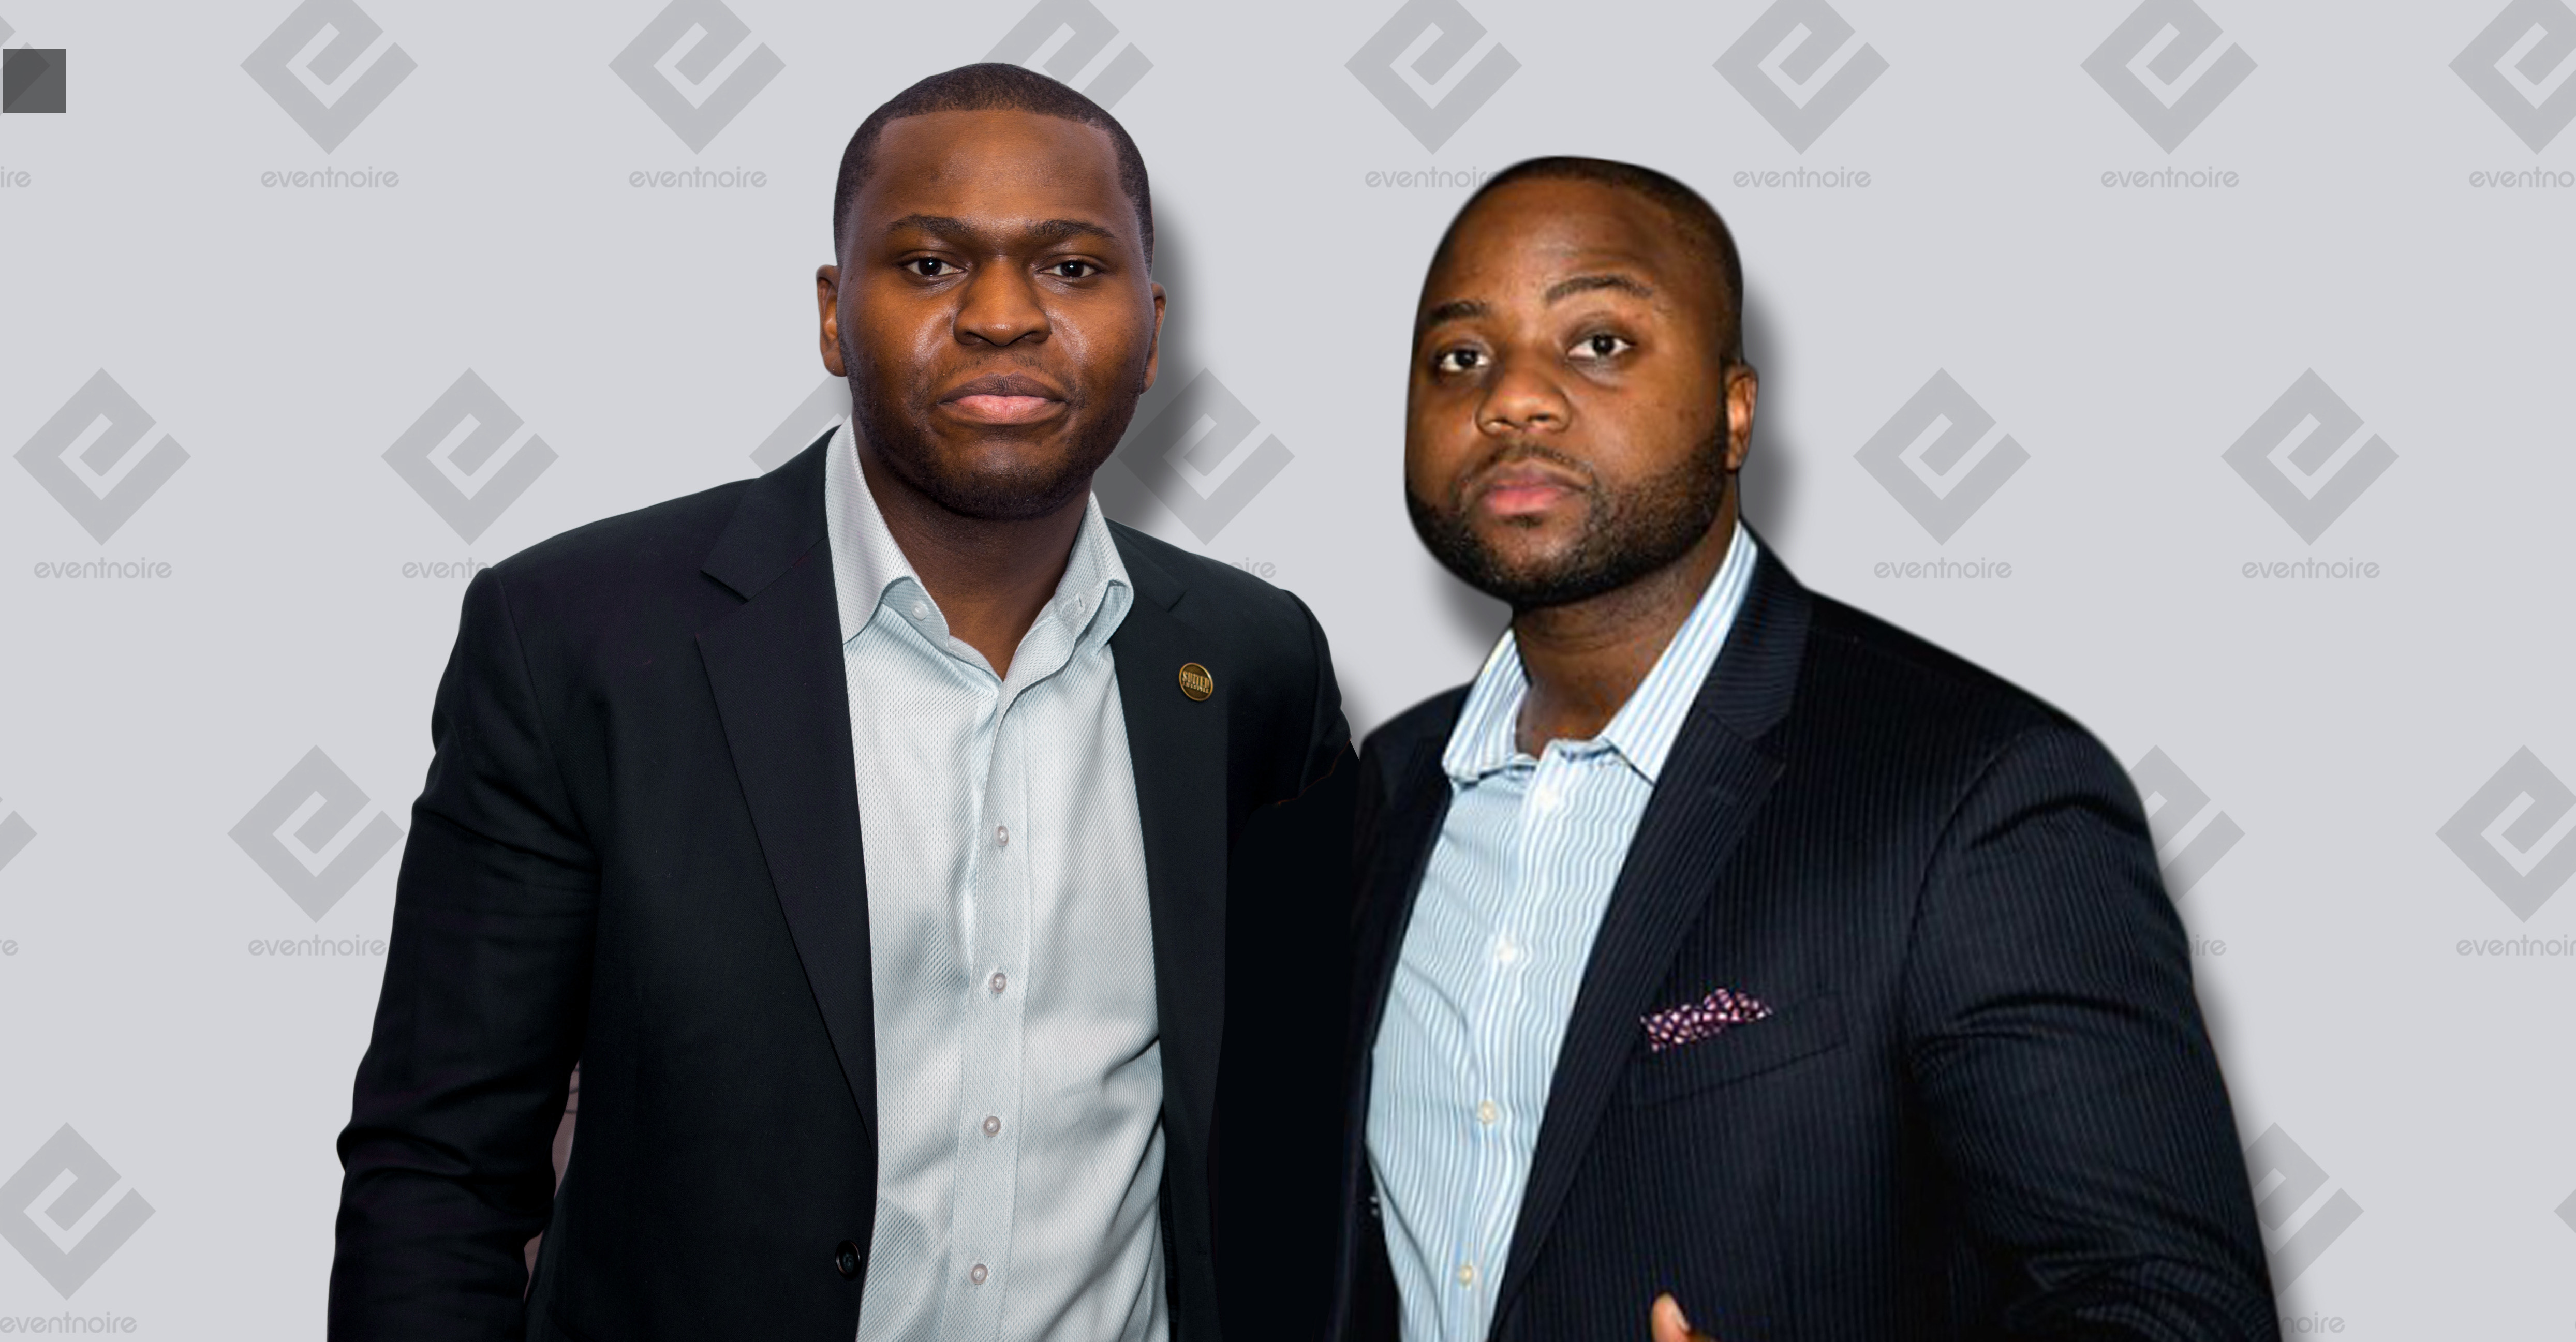 Eventnoire's Innovative Tech Platform is Changing the Industry for Black Events